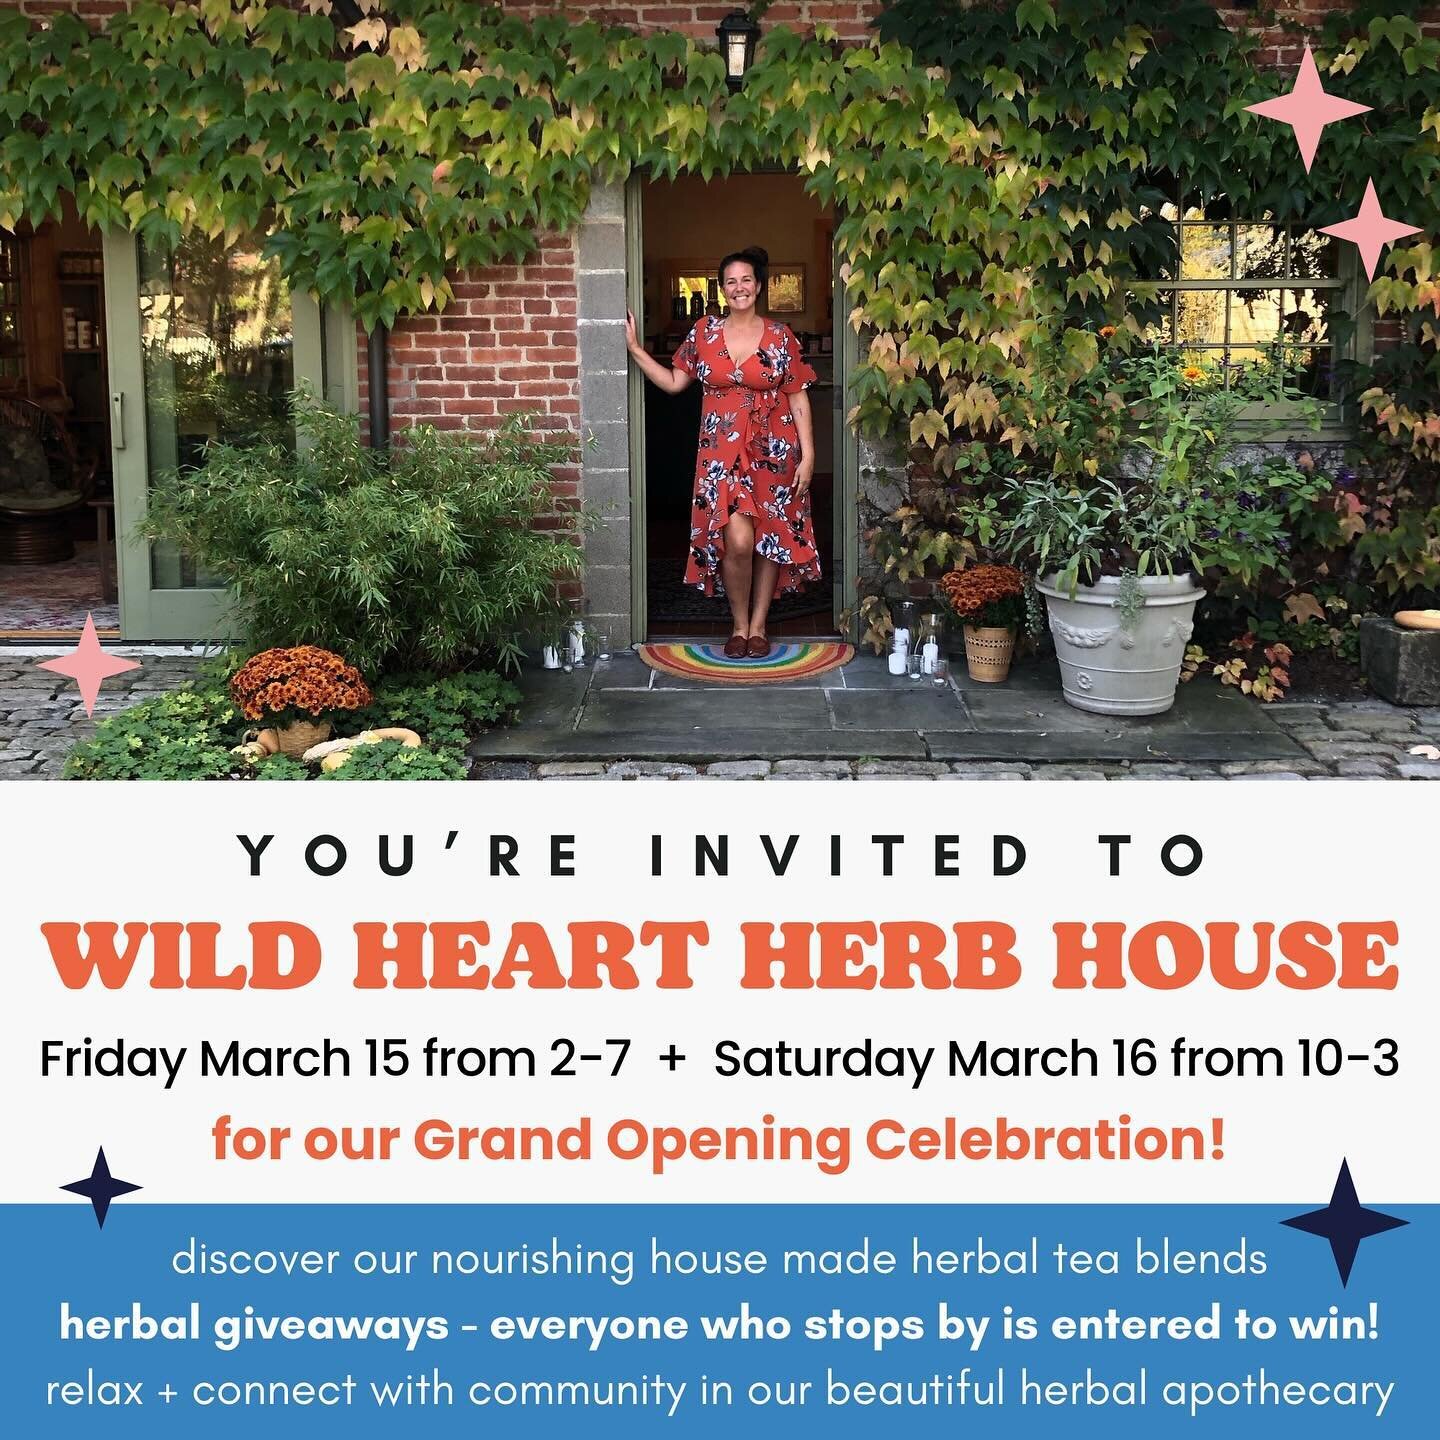 You are invited to Wild Heart&rsquo;s Grand Opening Celebration! 

Even though we&rsquo;ve been bopping along since the end of October, it&rsquo;s finally time for an official Grand Opening at Wild Heart! 

Join Friday March 15 from 2 to 7 and Saturd